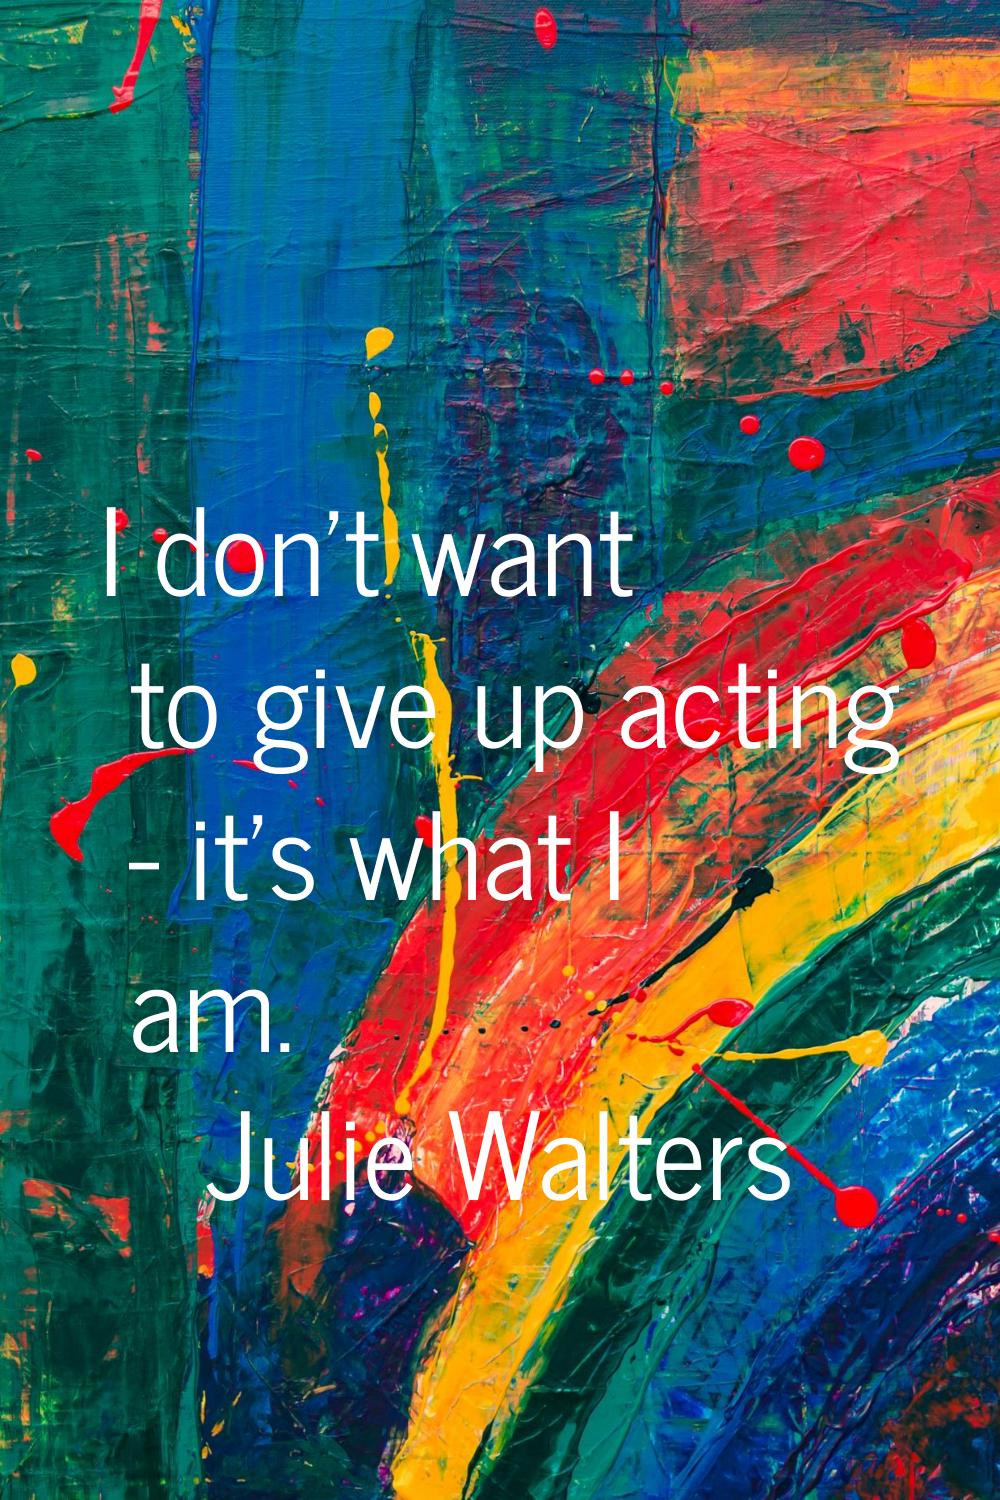 I don't want to give up acting - it's what I am.